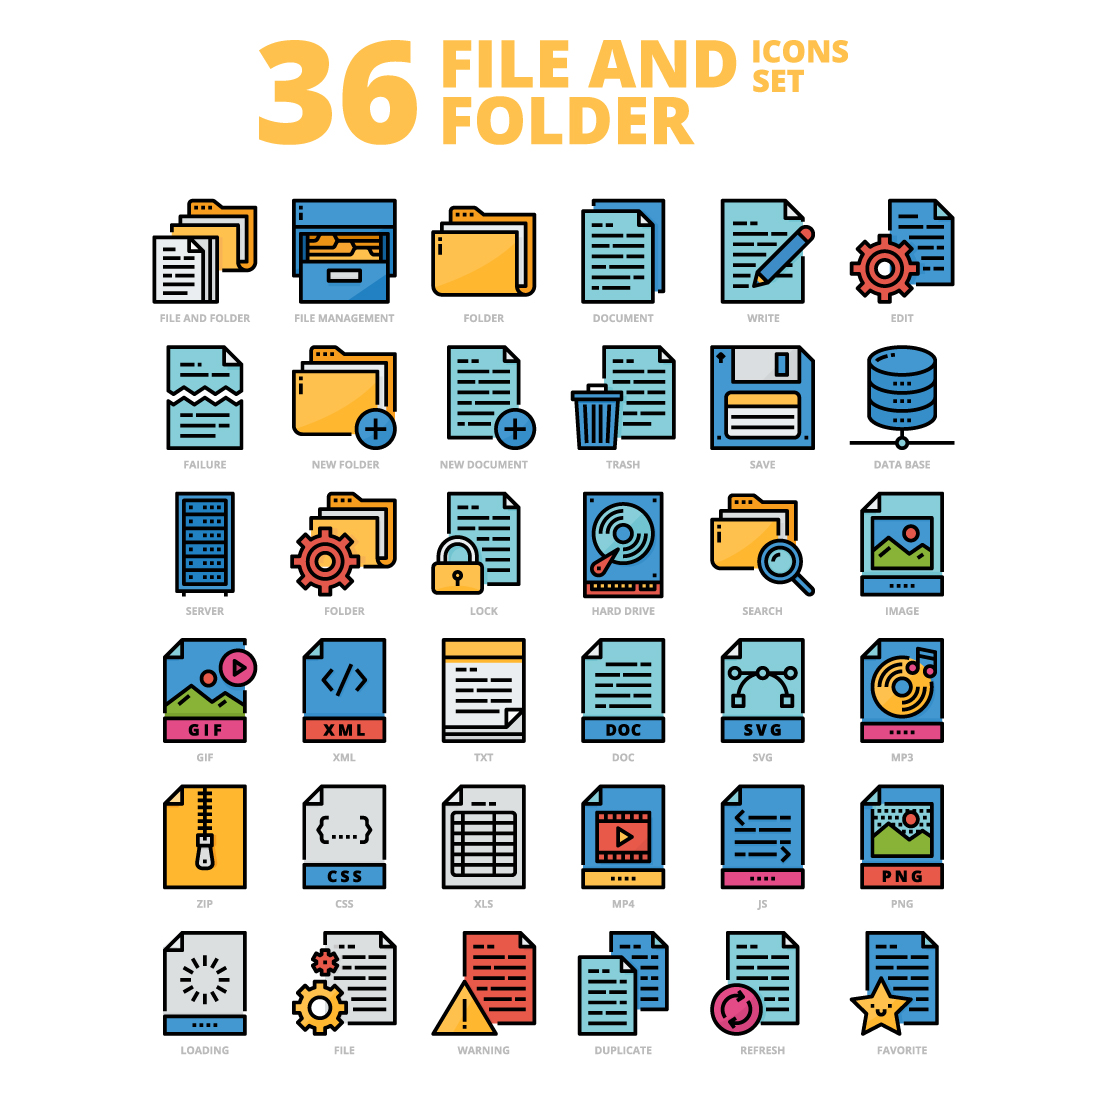 36 File and Folder Icons Set x 4 Styles cover image.